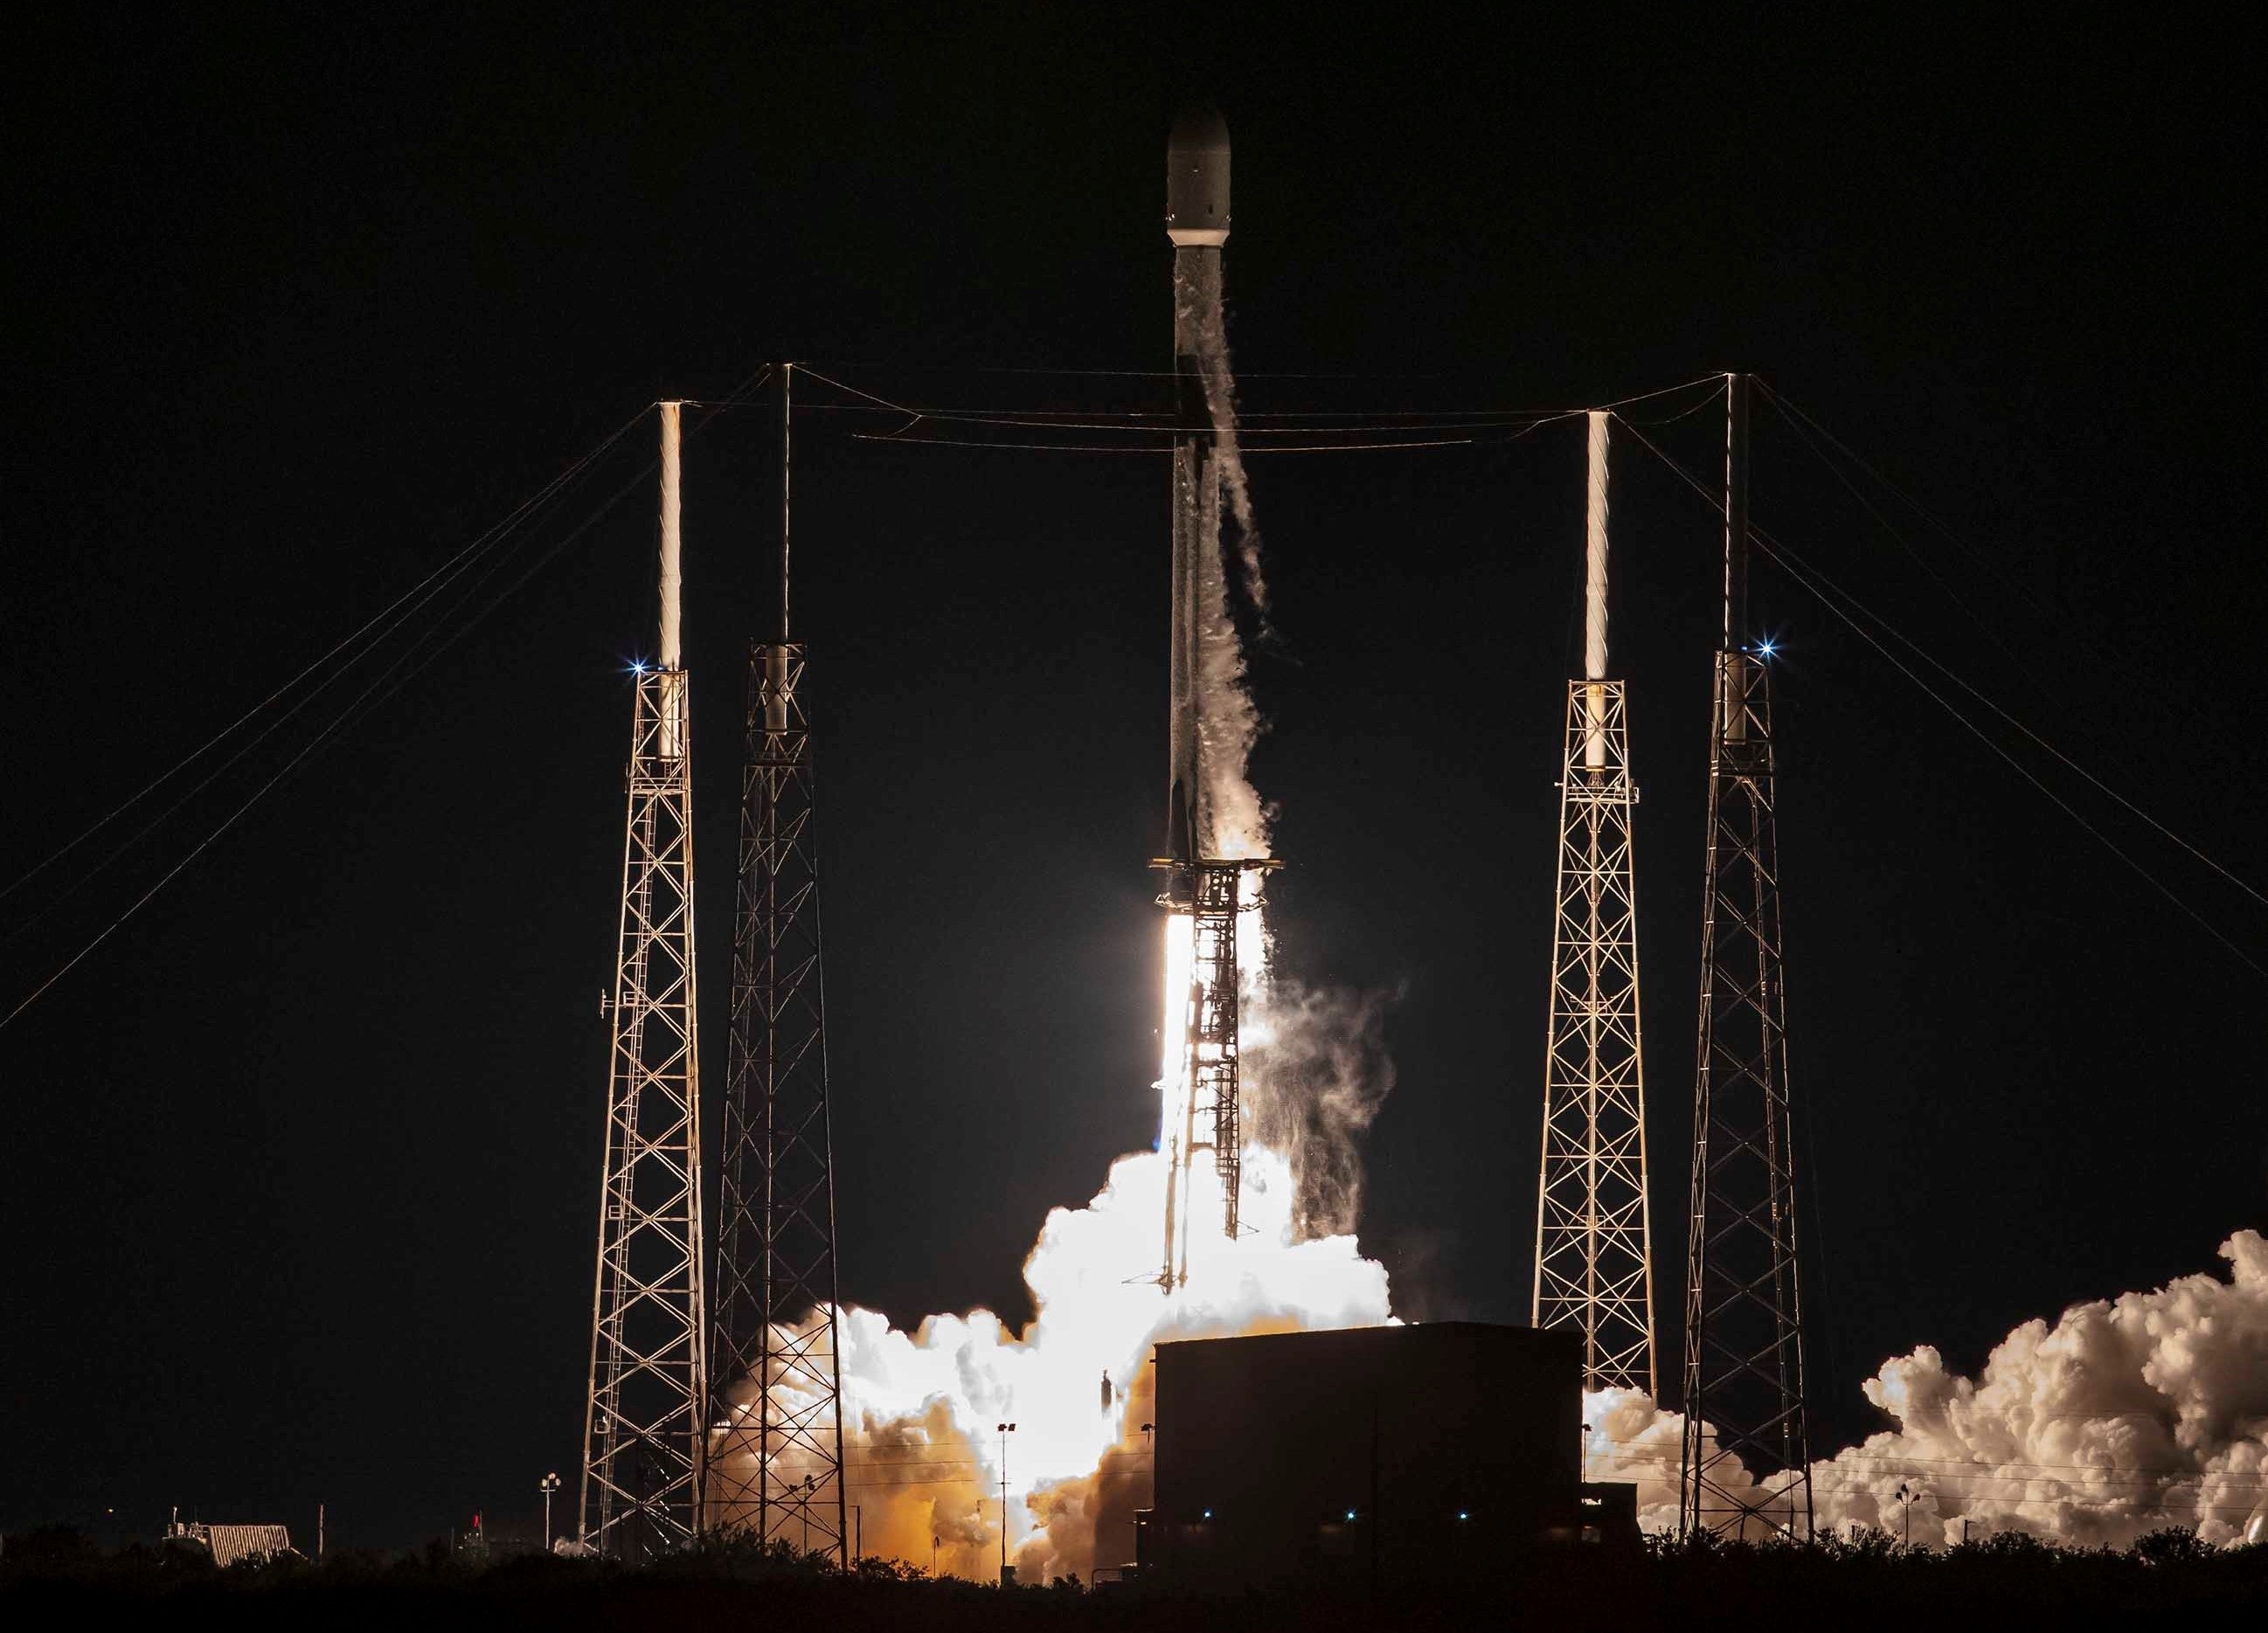 SpaceX Falcon 9 launches the heaviest Starlink mission ever flown at over 17.4 metric tons